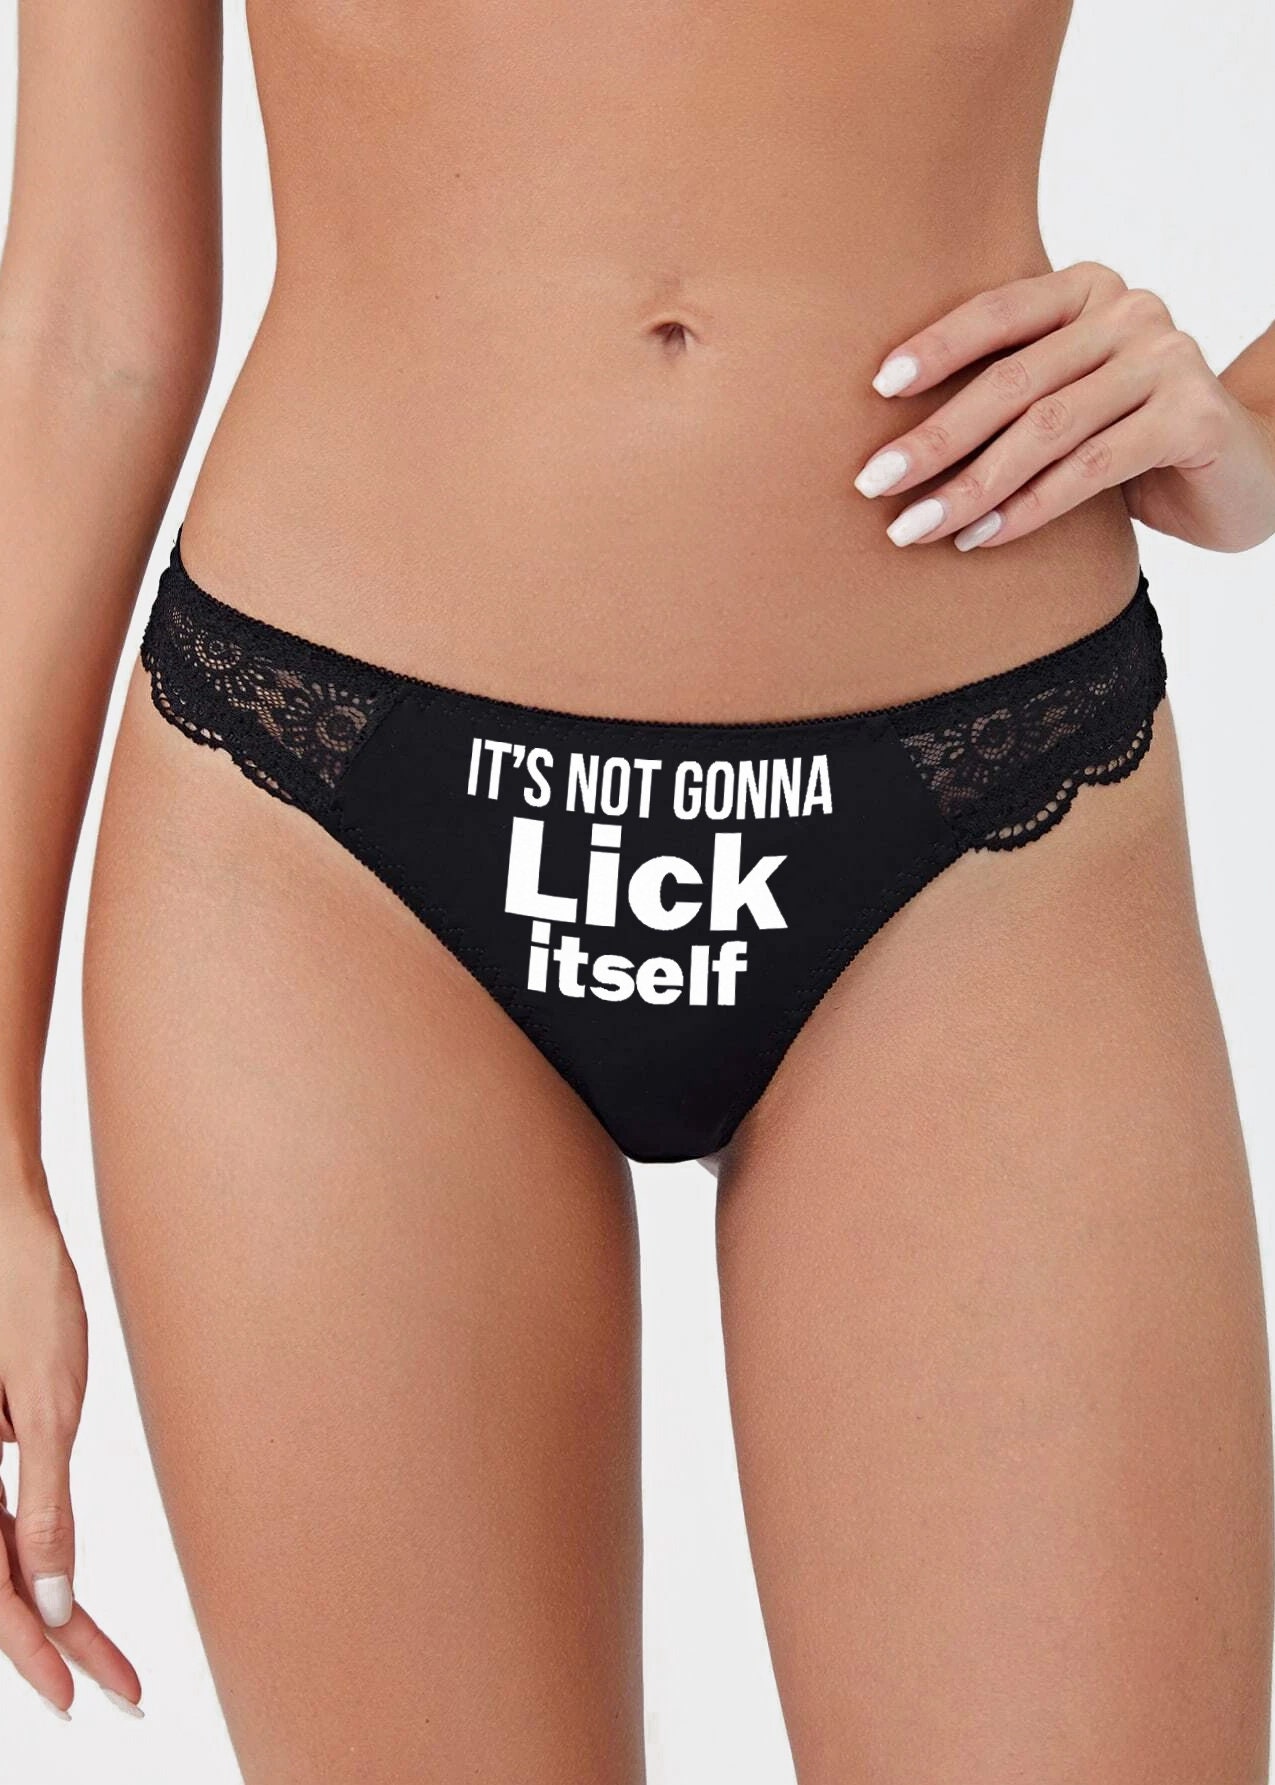 Valentines Panties Its Not Going to Lick Itself Side Lace Thong Panty Bride  Panty Bachelorette Gift Bachelorette Wedding Lingerie 